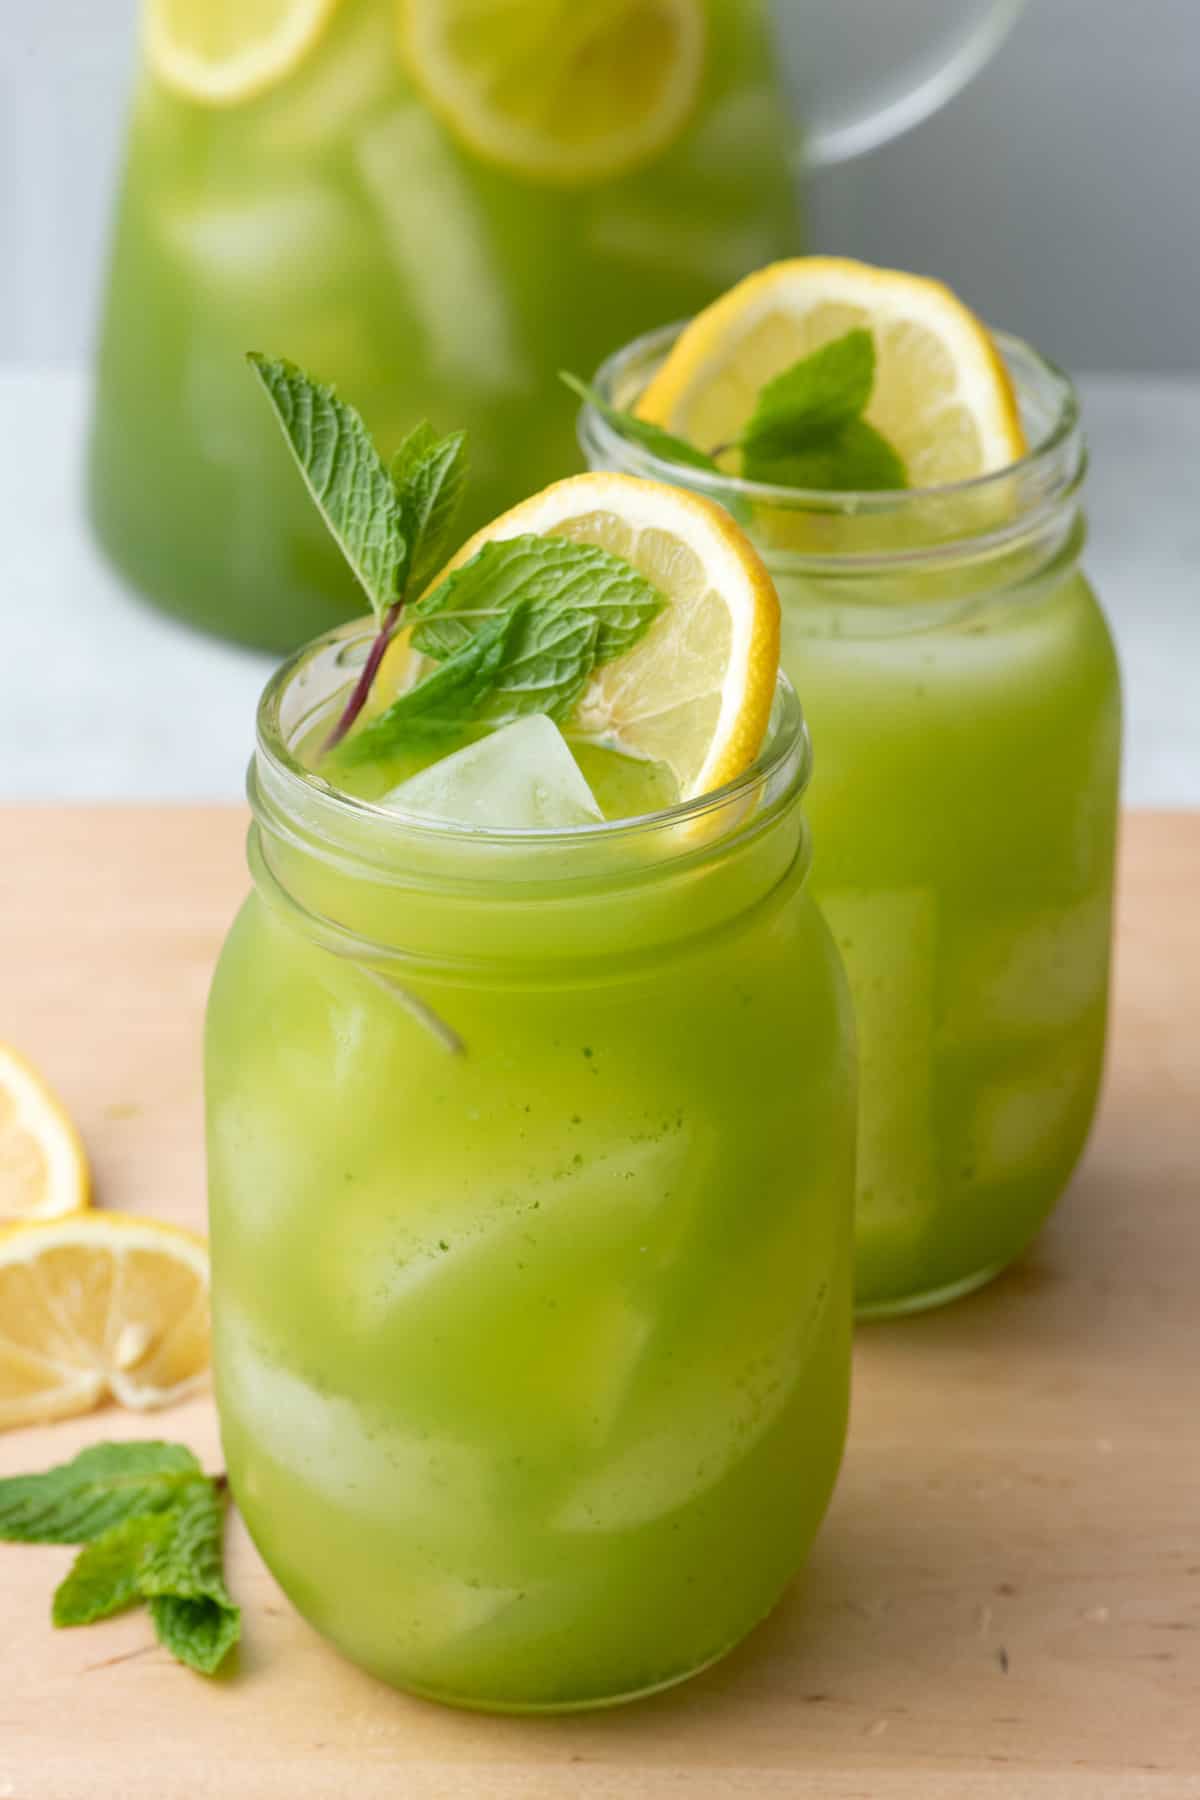 green and yellow logo drink